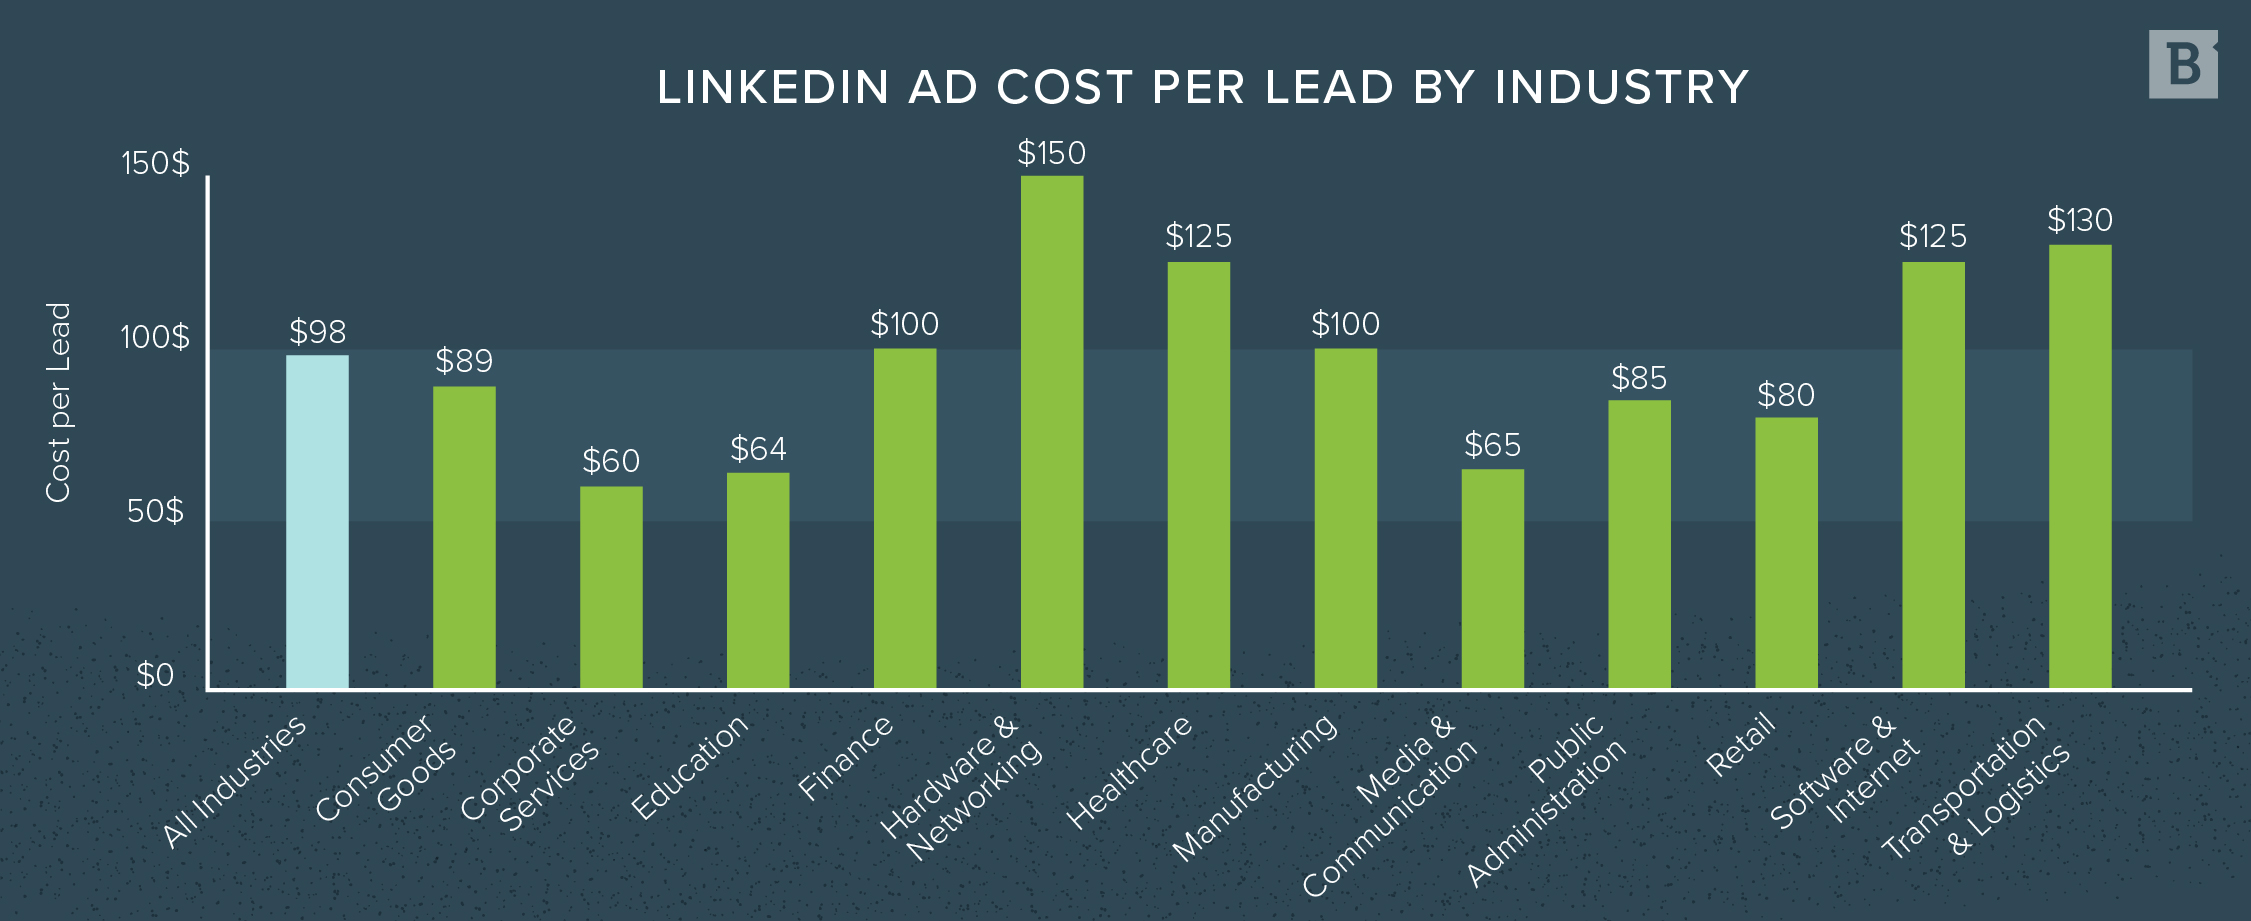 LinkedIn ad cost per lead by industry